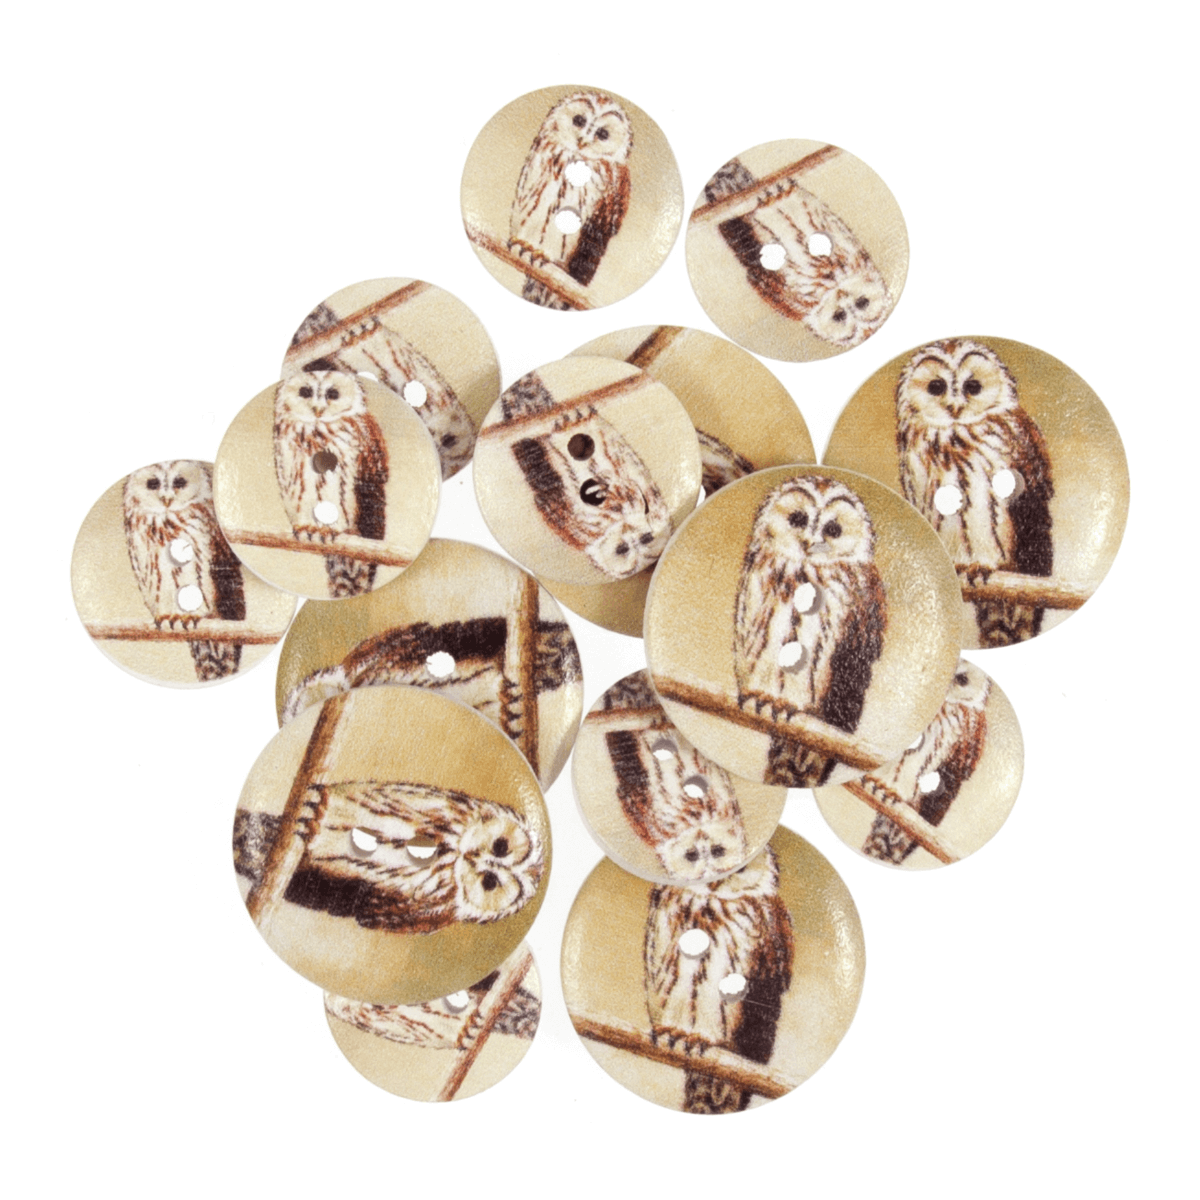 Assorted Wooden Buttons 15 Pack Sizes From 15mm - 25mm